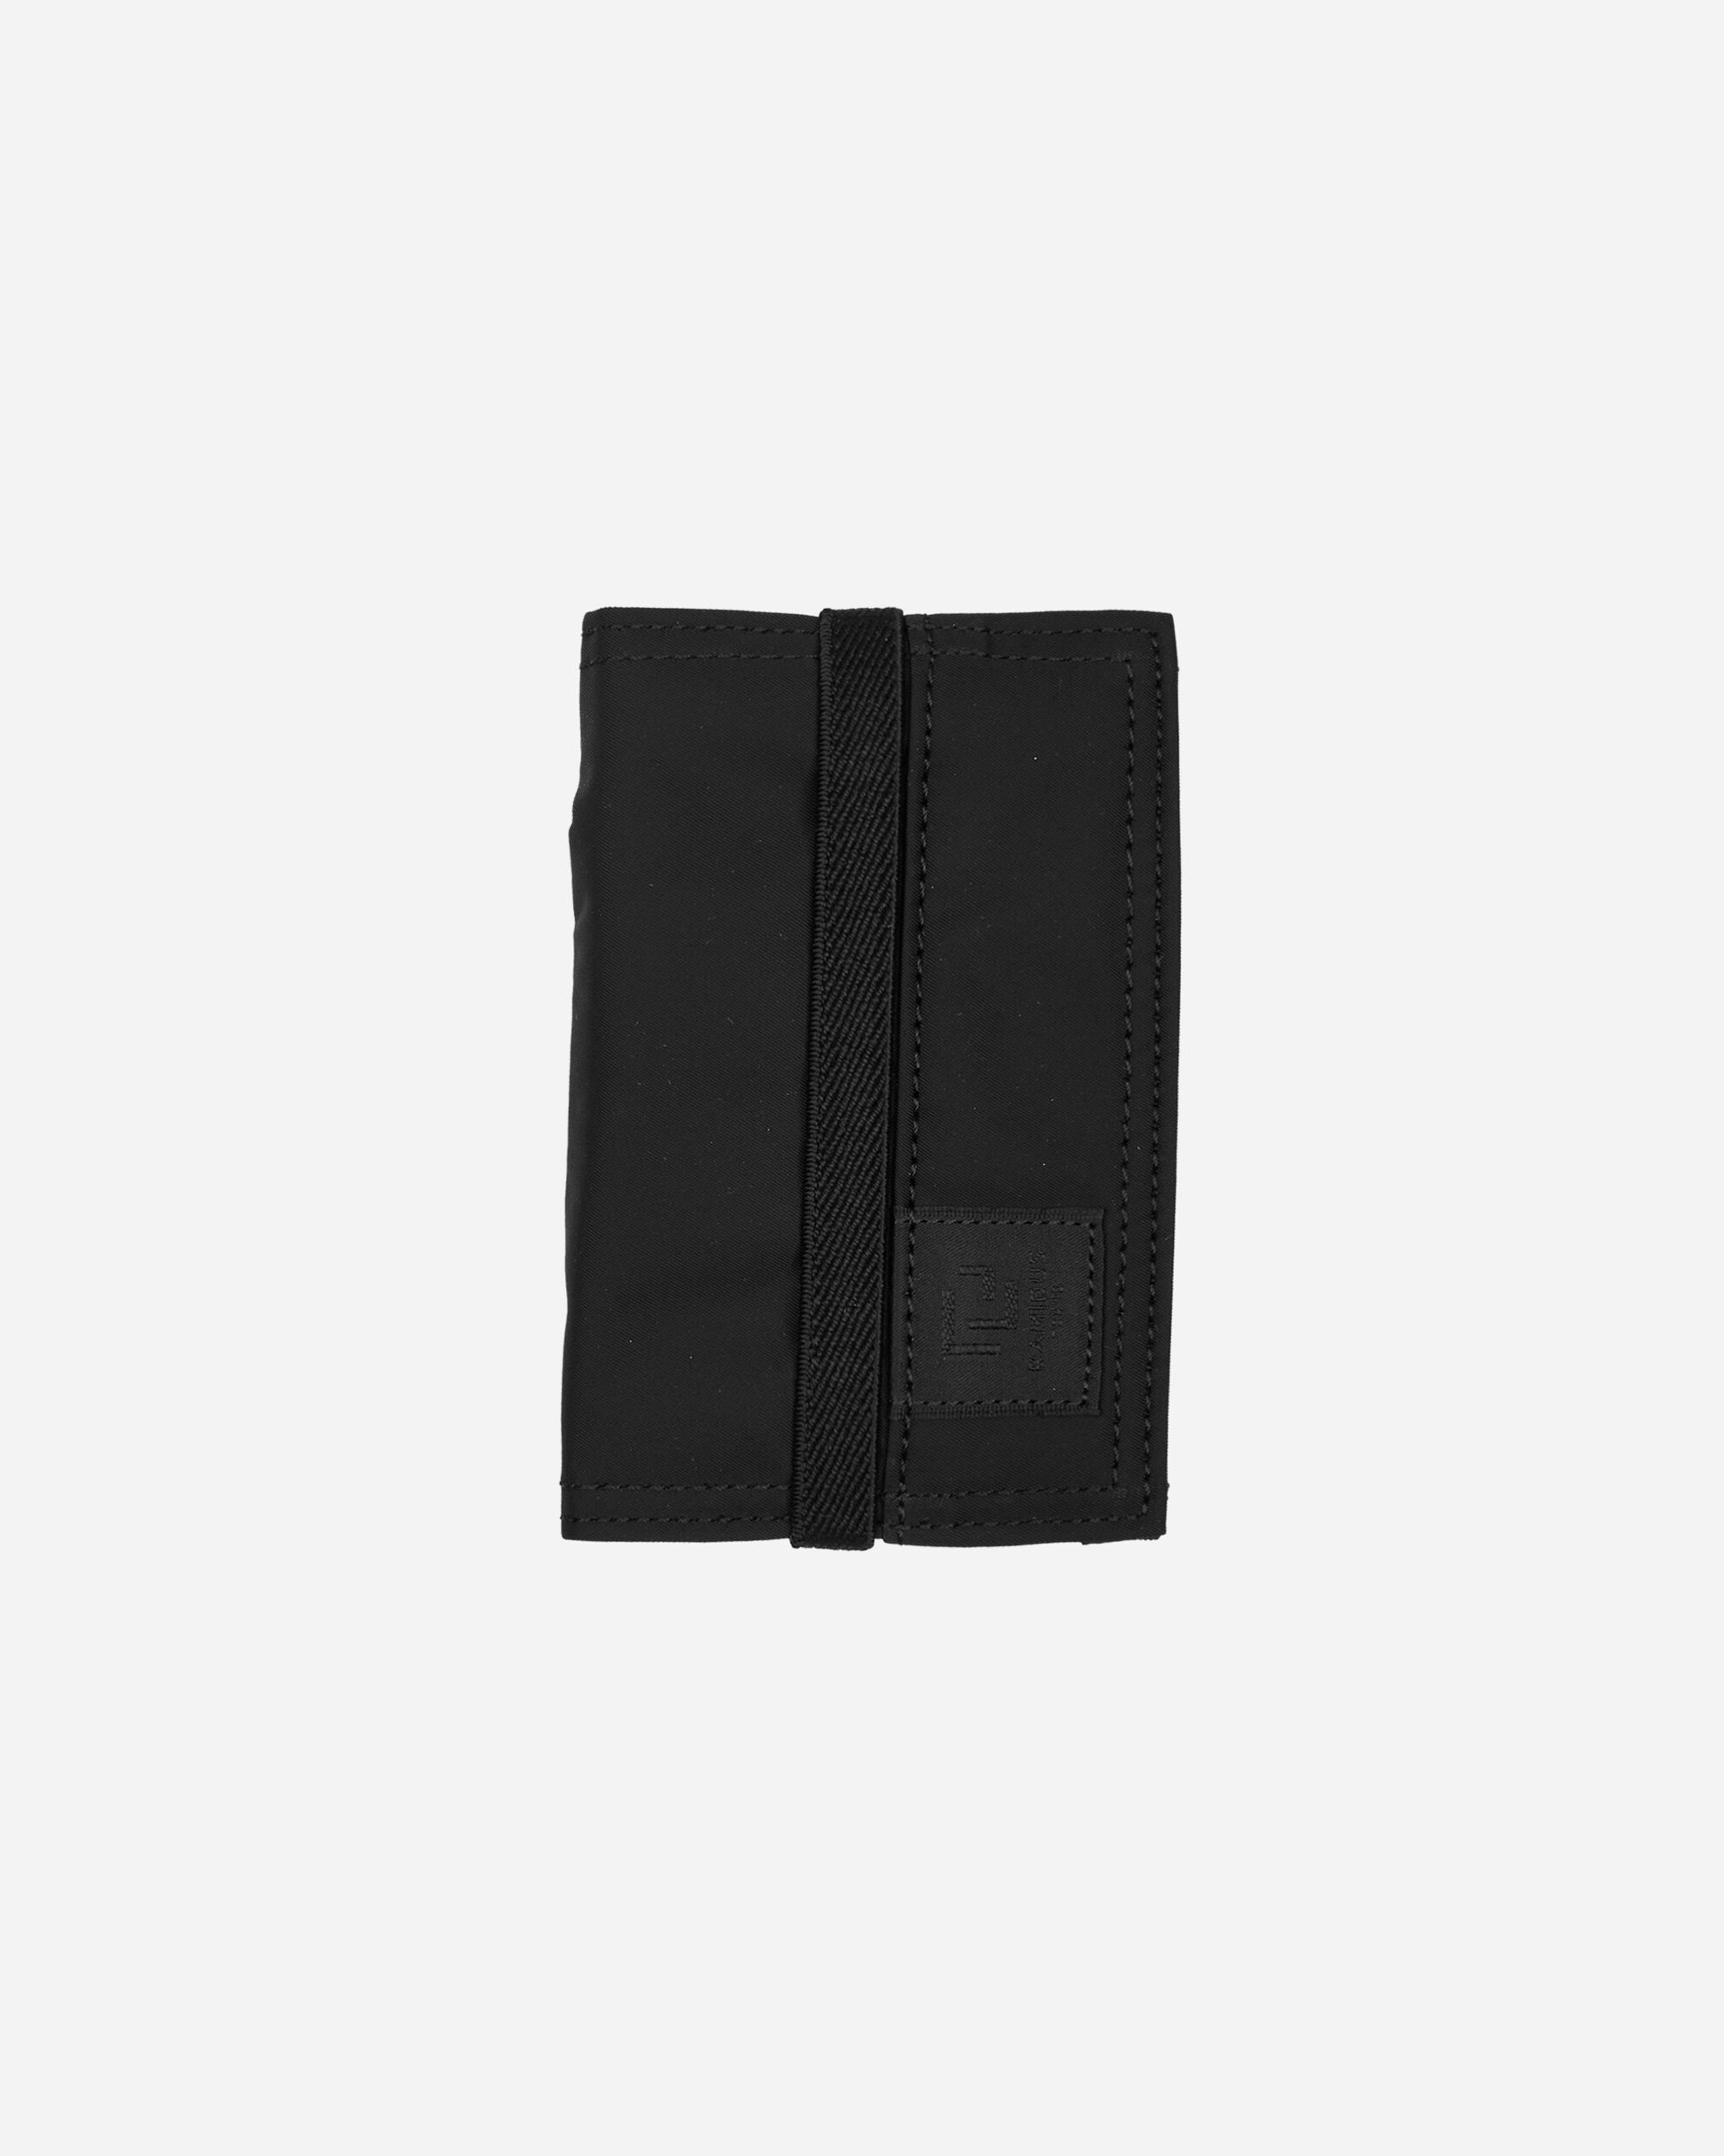 Ramidus Band Card Case Black Wallets and Cardholders Cardholders B011019 001